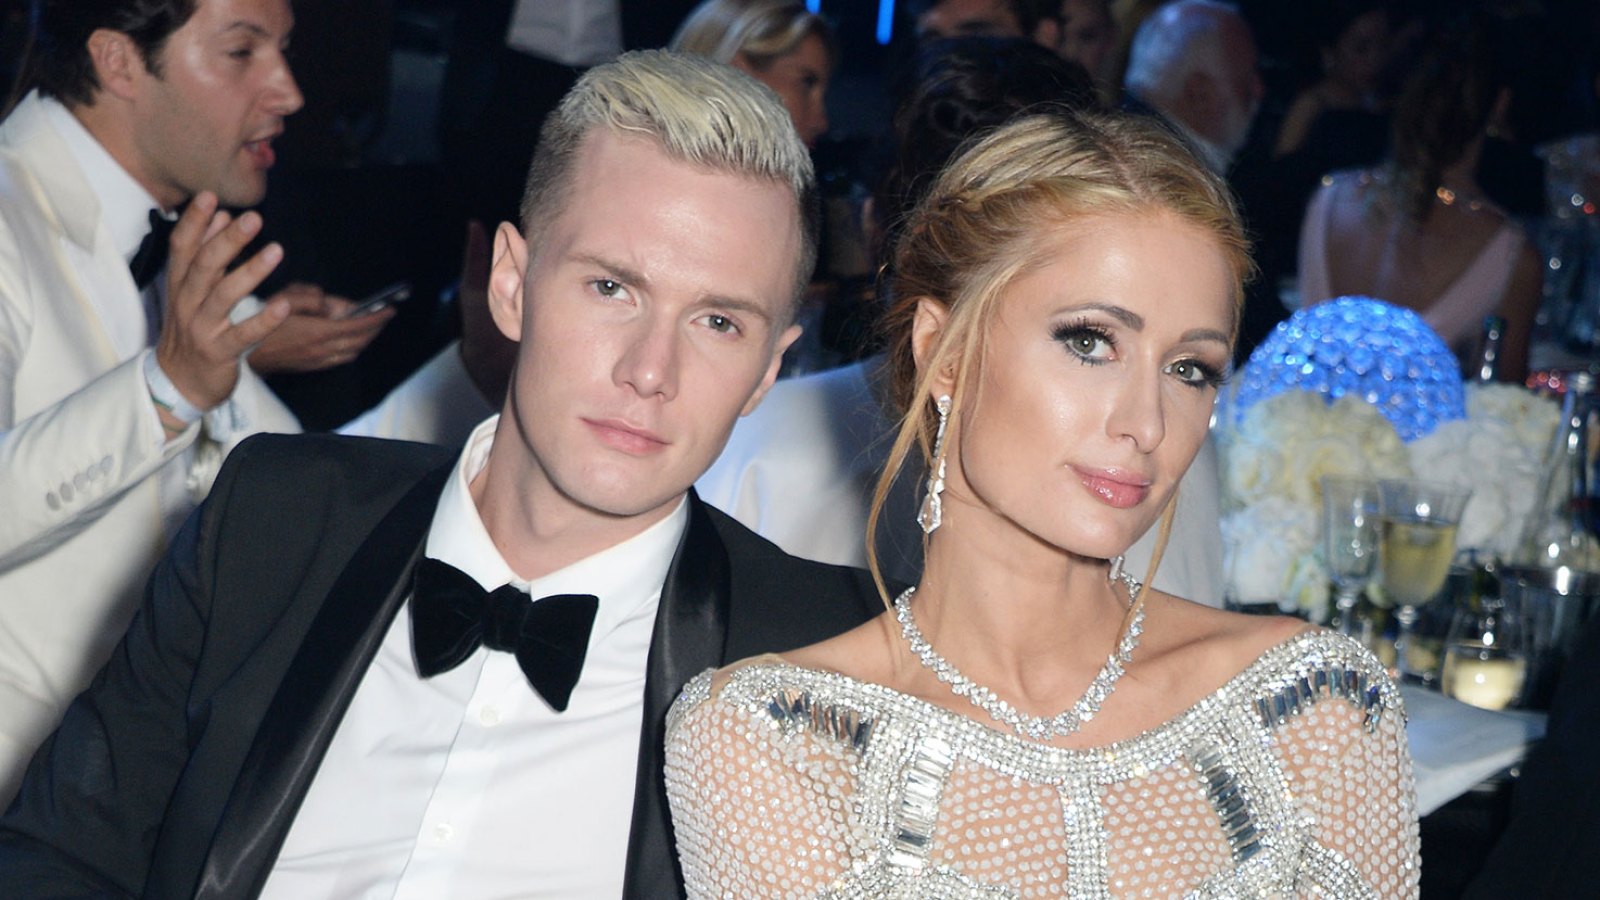 Paris Hilton’s Brother Barron Hilton Knows She’ll Find Love Again After Ending Engagement to Chris Zylka